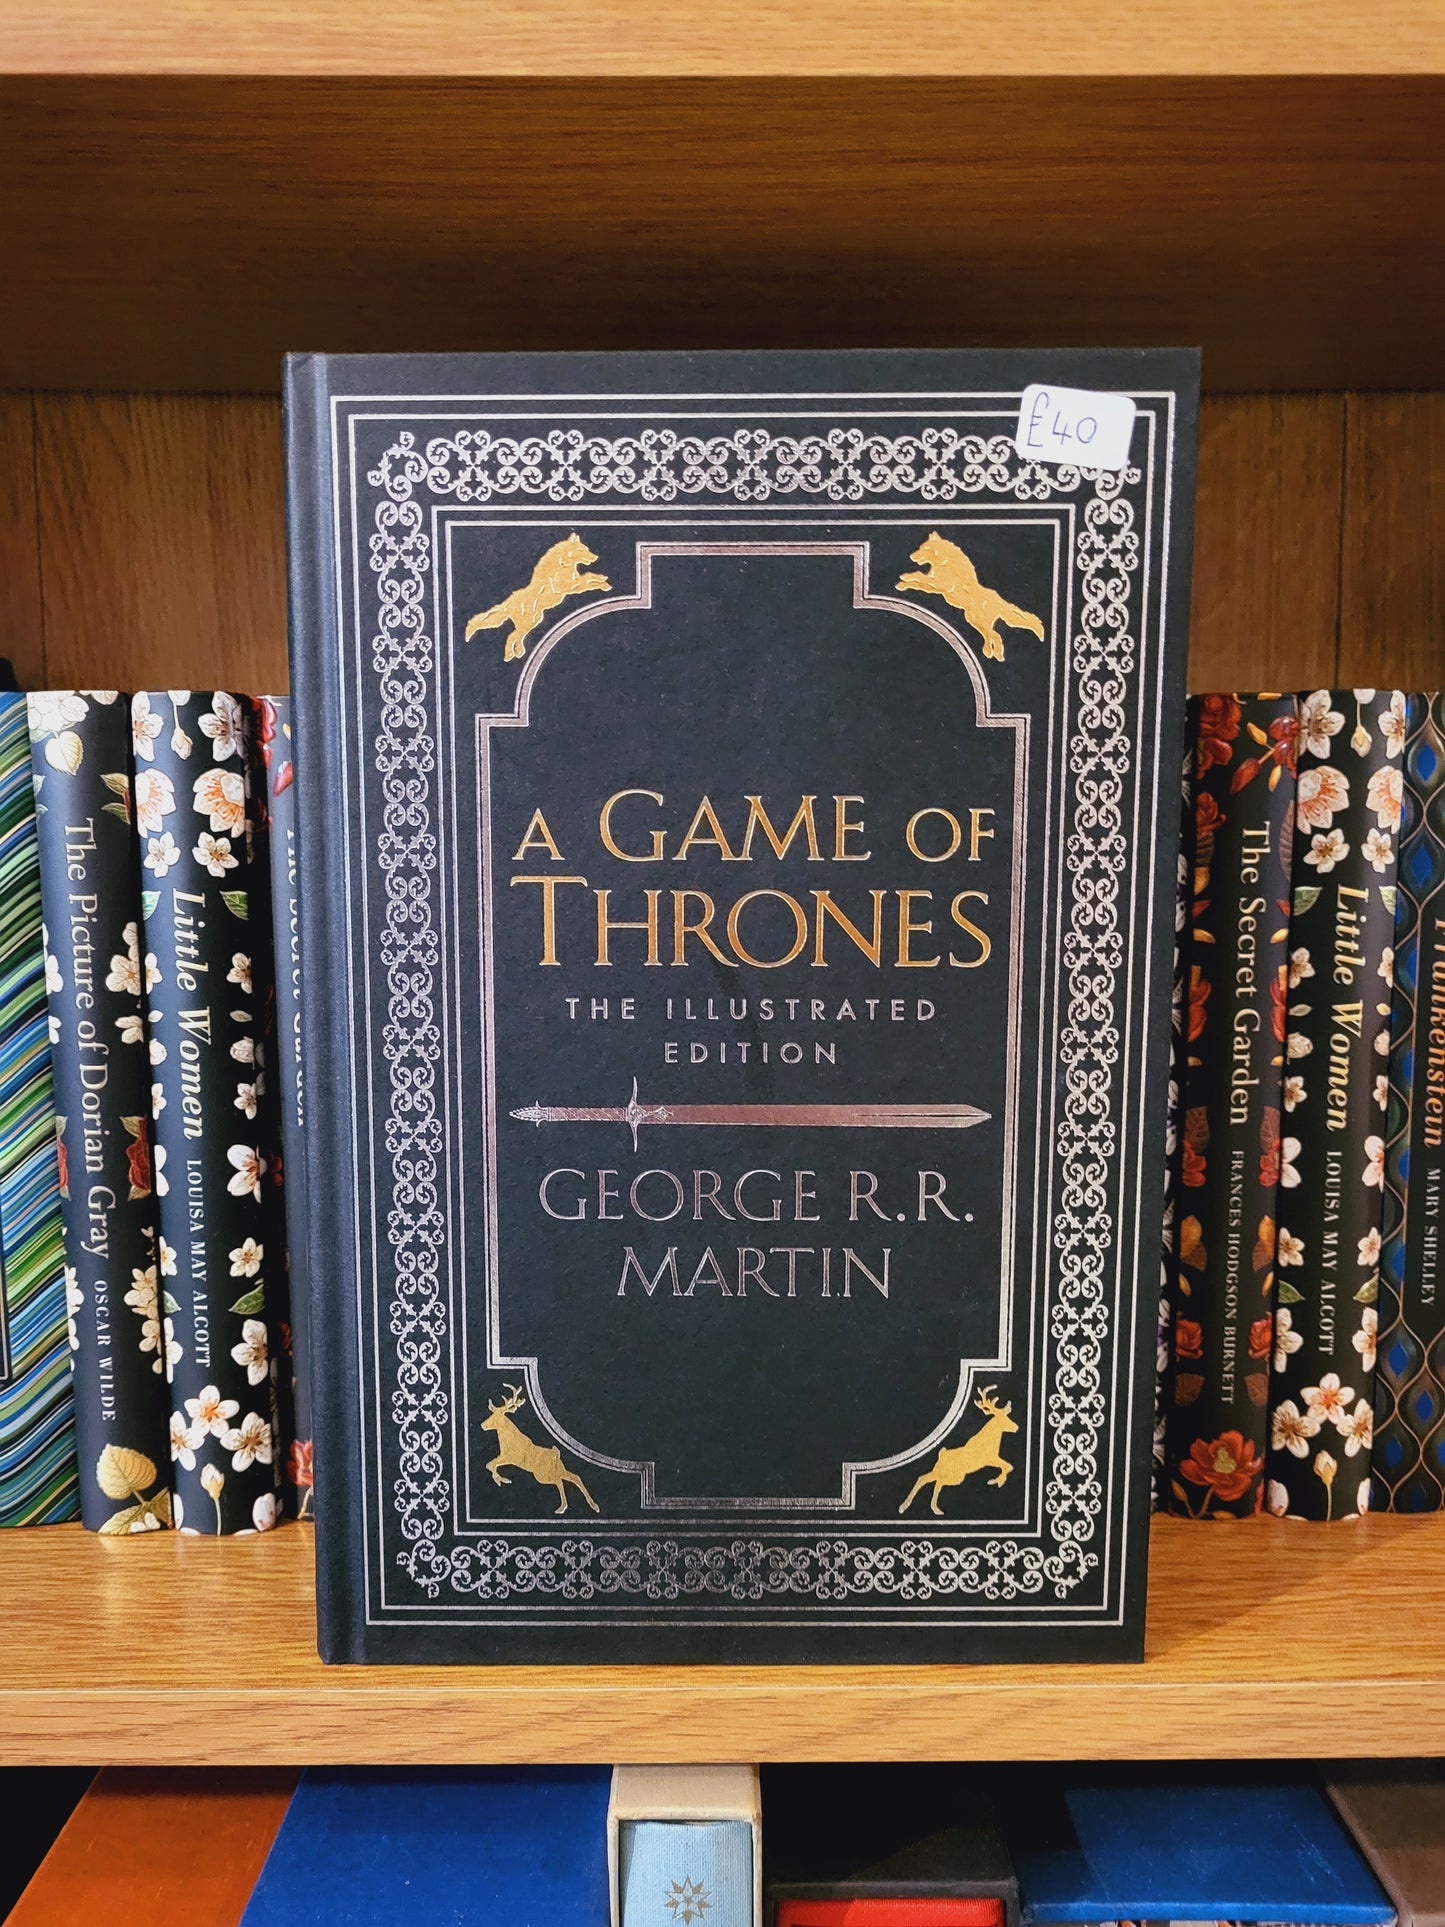 A Game of Thrones: Illustrated Edition - George R.R. Martin